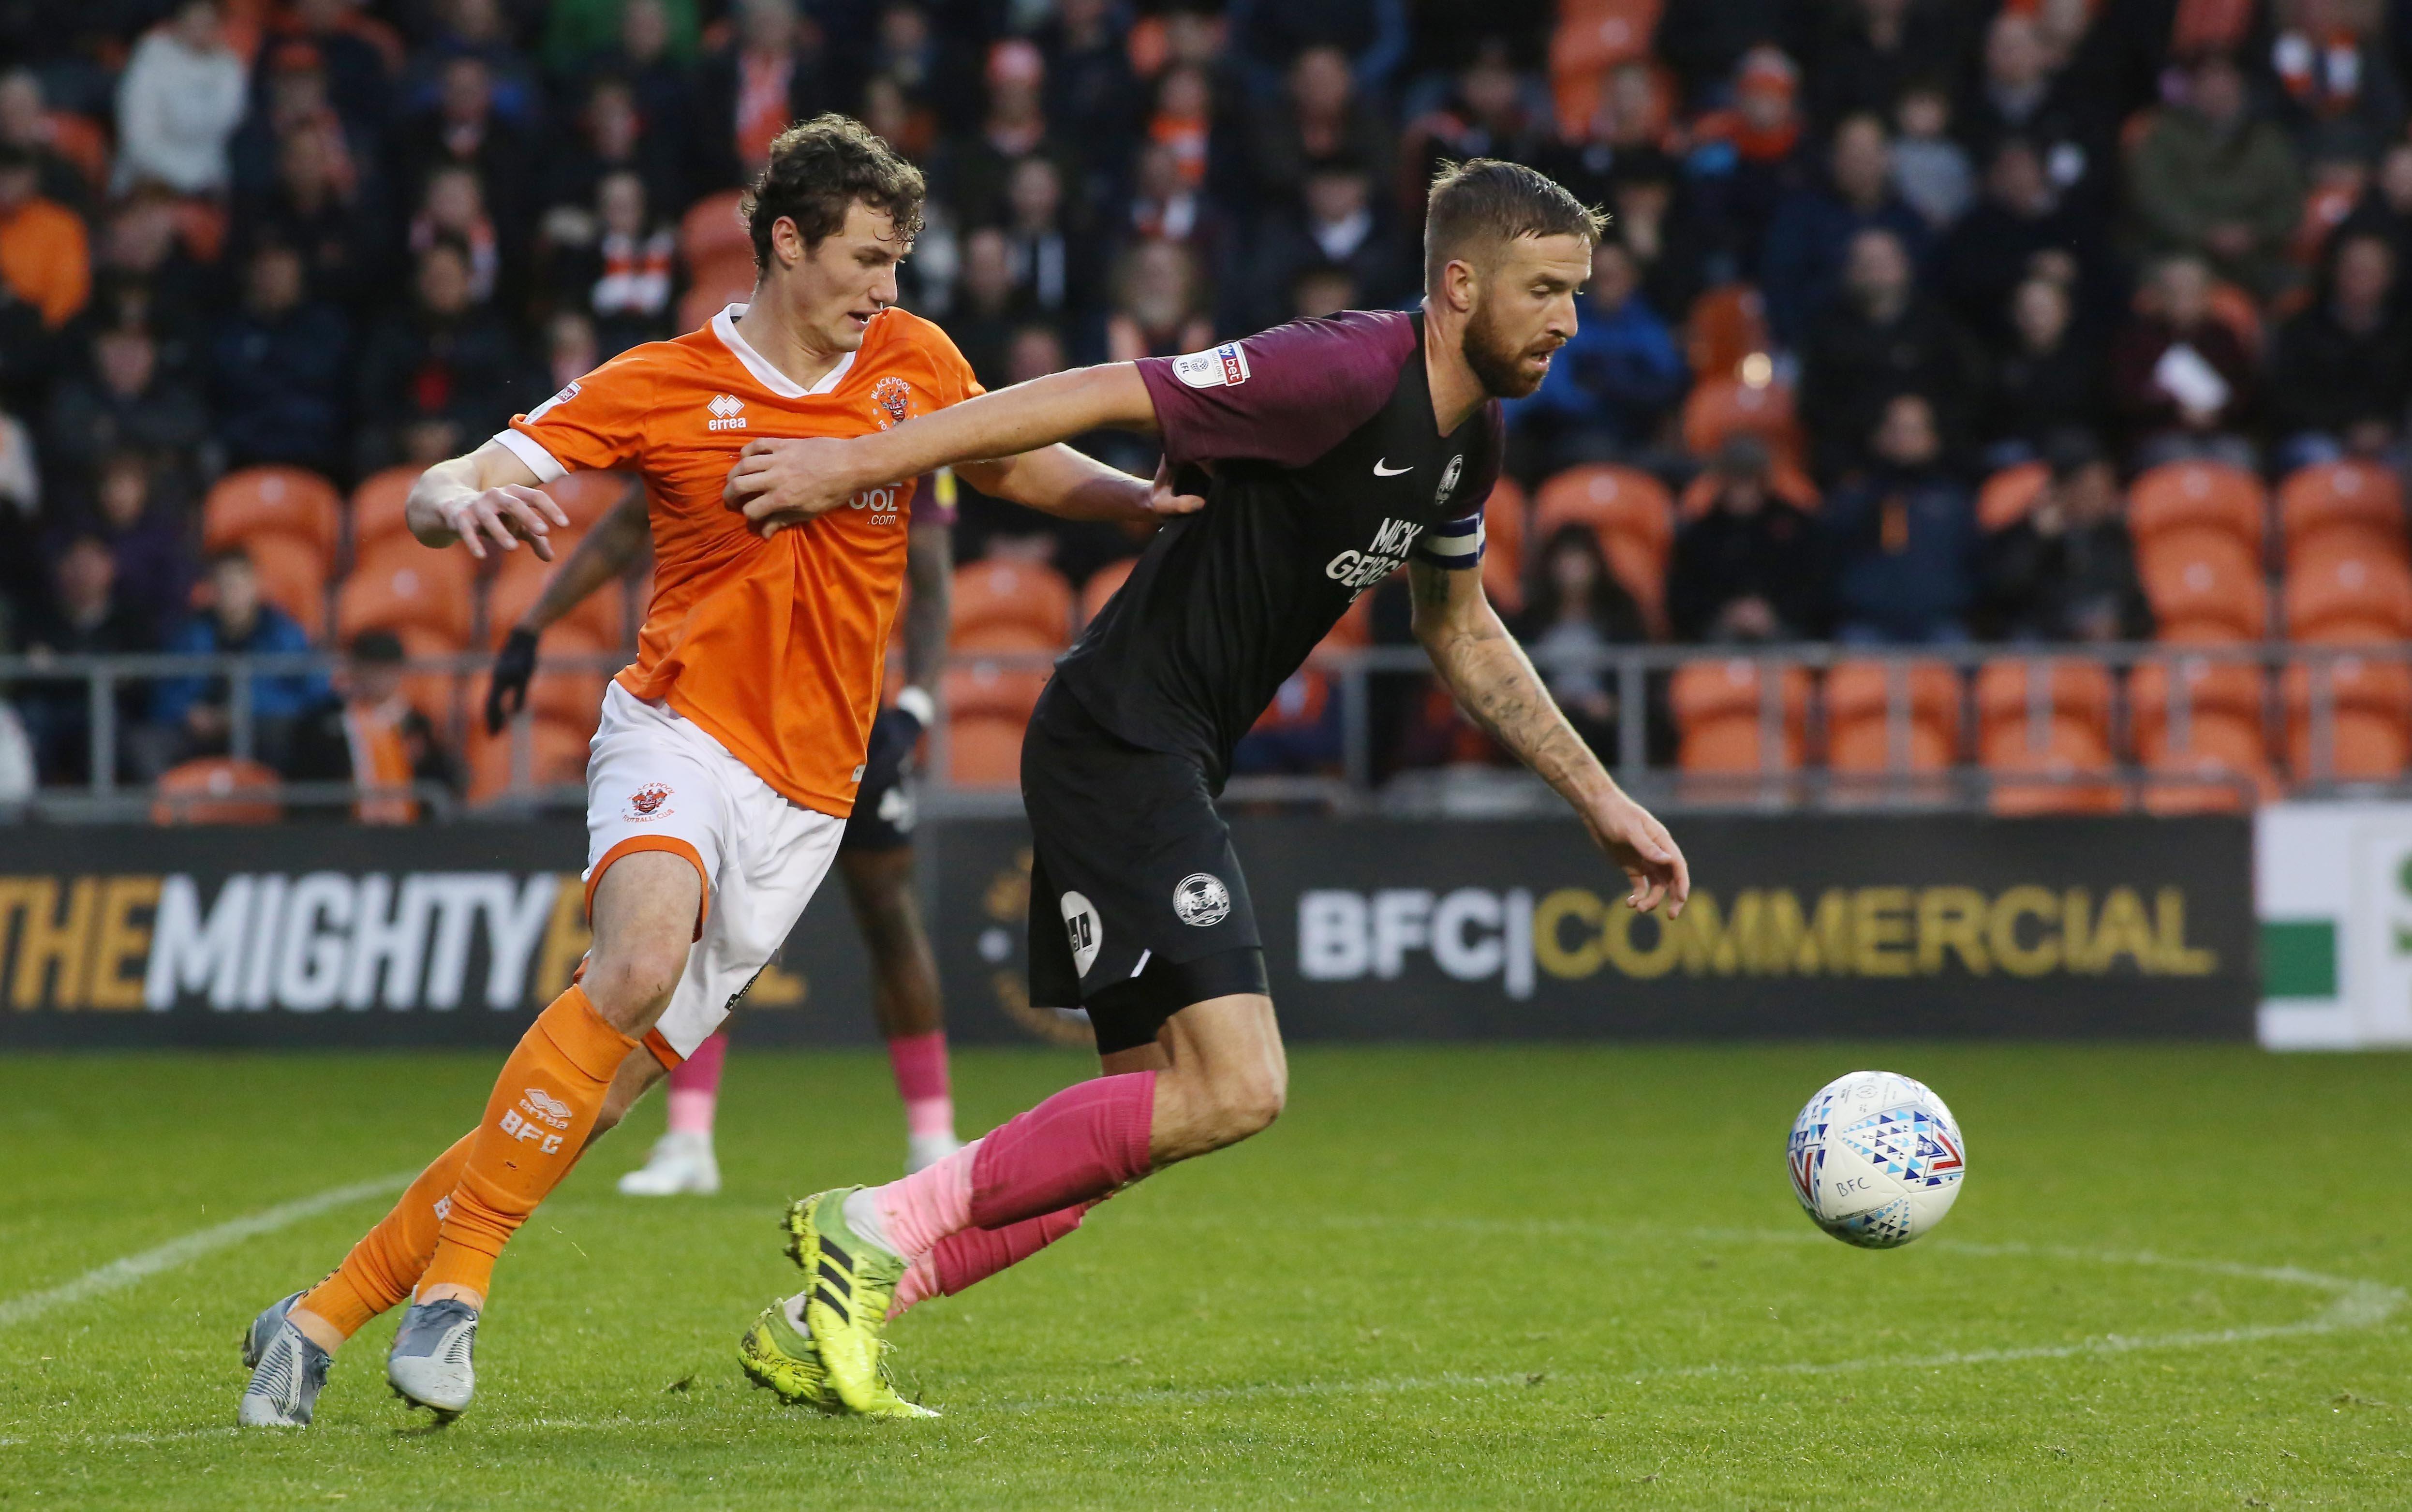 Kept dangerous Daryl Murphy under wraps for 90 minutes and was a bigger nuisance in the opposition penalty area than he had been all season. Missed a good chance to score early on though.